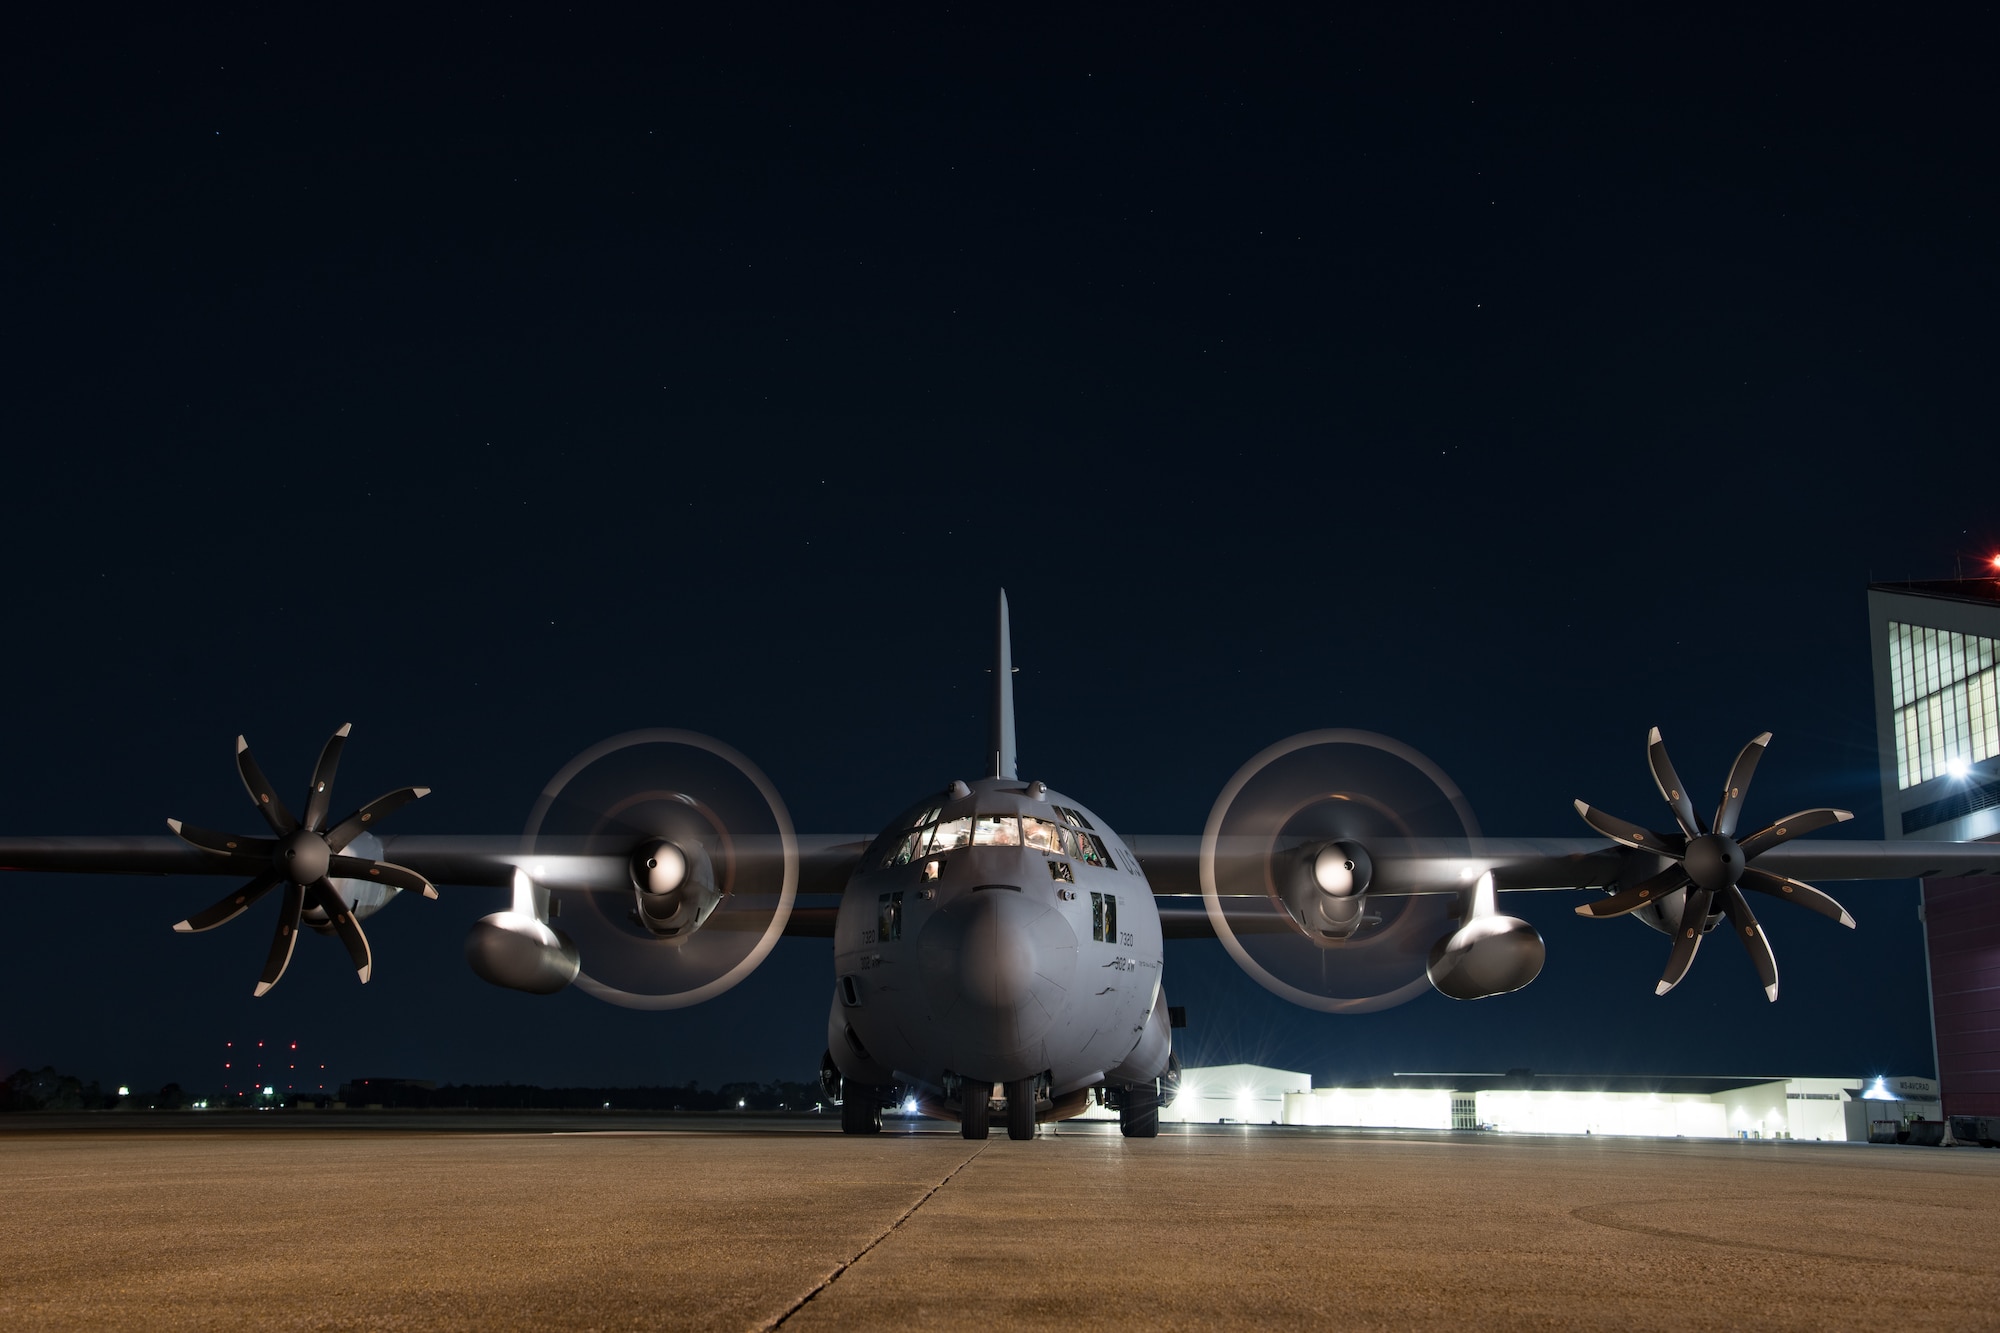 Front-on visual of a C-130H aircraft parked at night with two outboard propellers still and two inboard propellers spinning and the crew compartment light on.